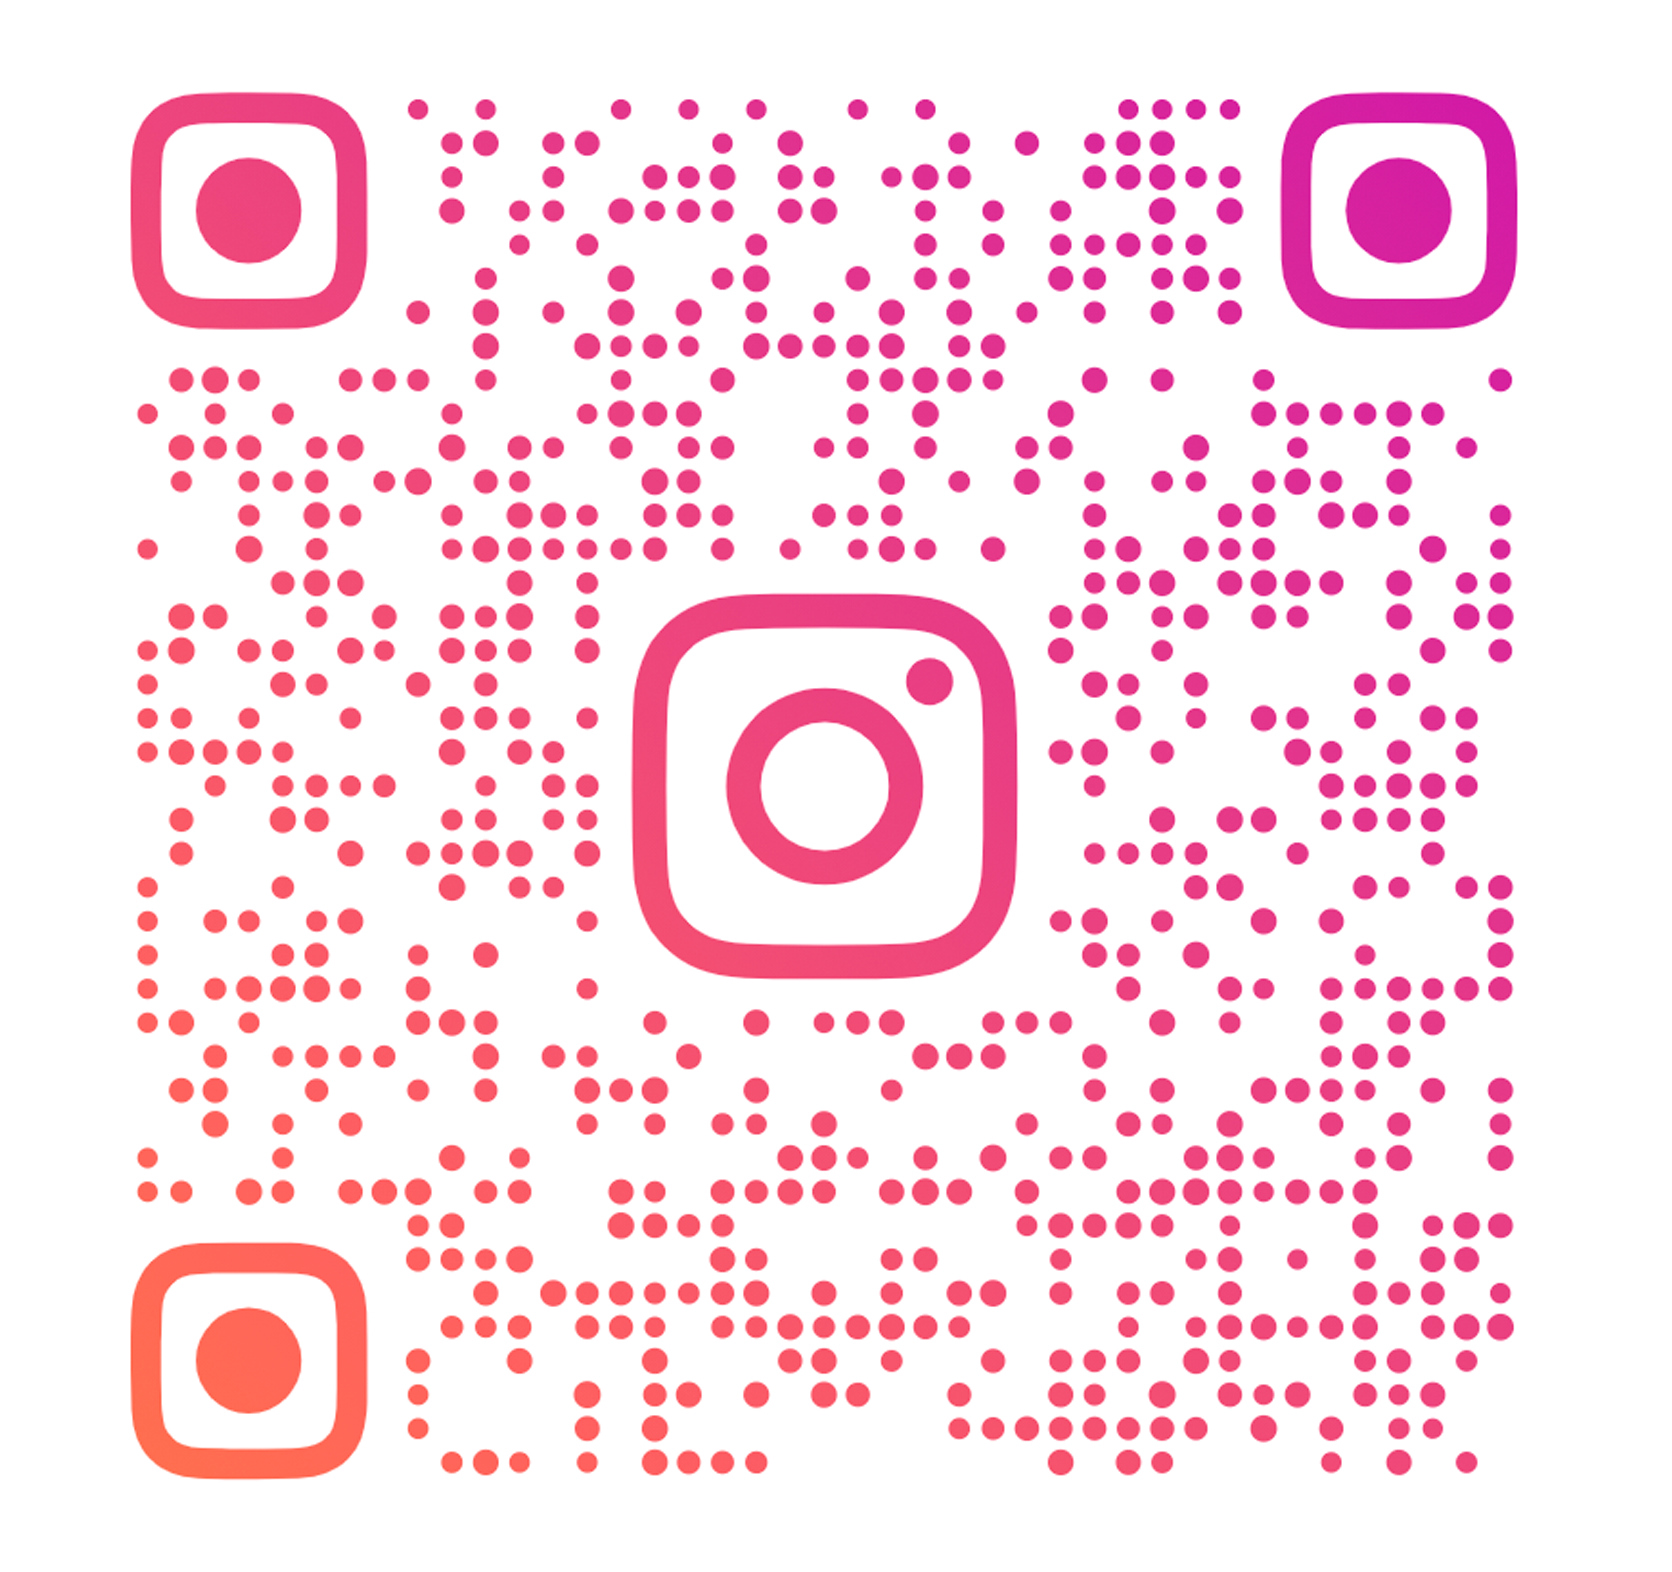 We are posting on Instagram - The Red Dot Gallery